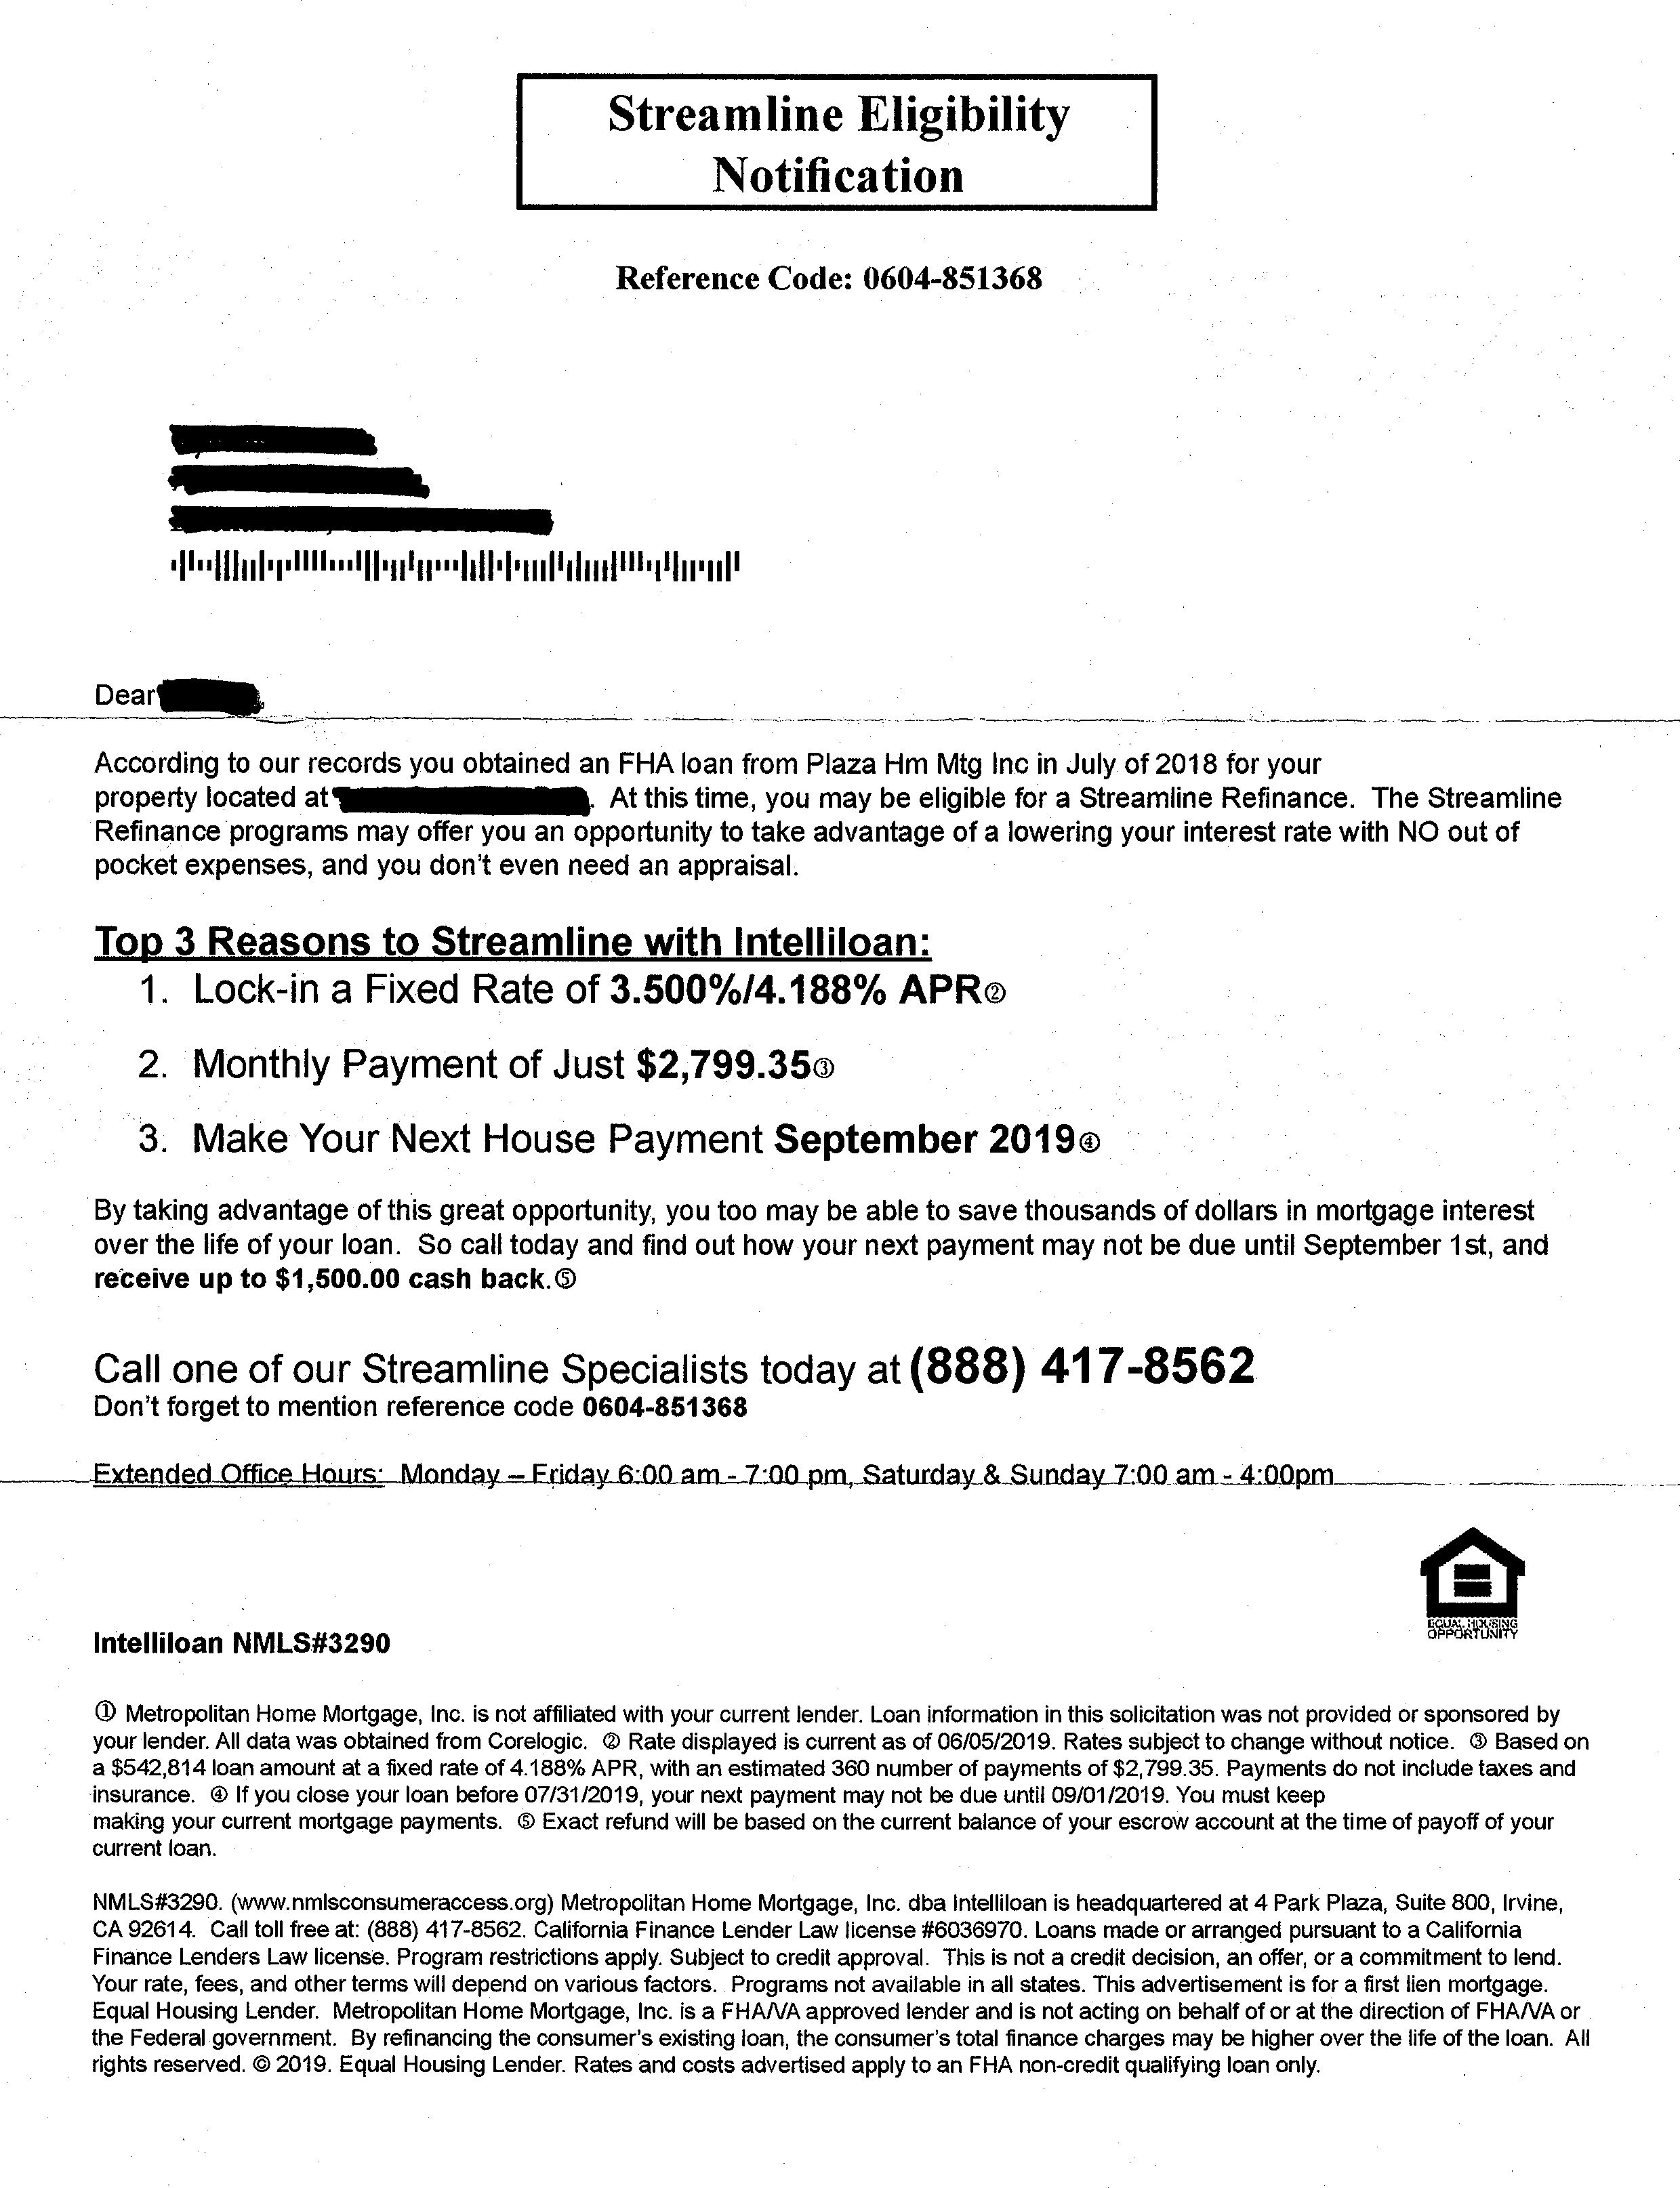 Mortgage Mailing for FHA Loans.jpg